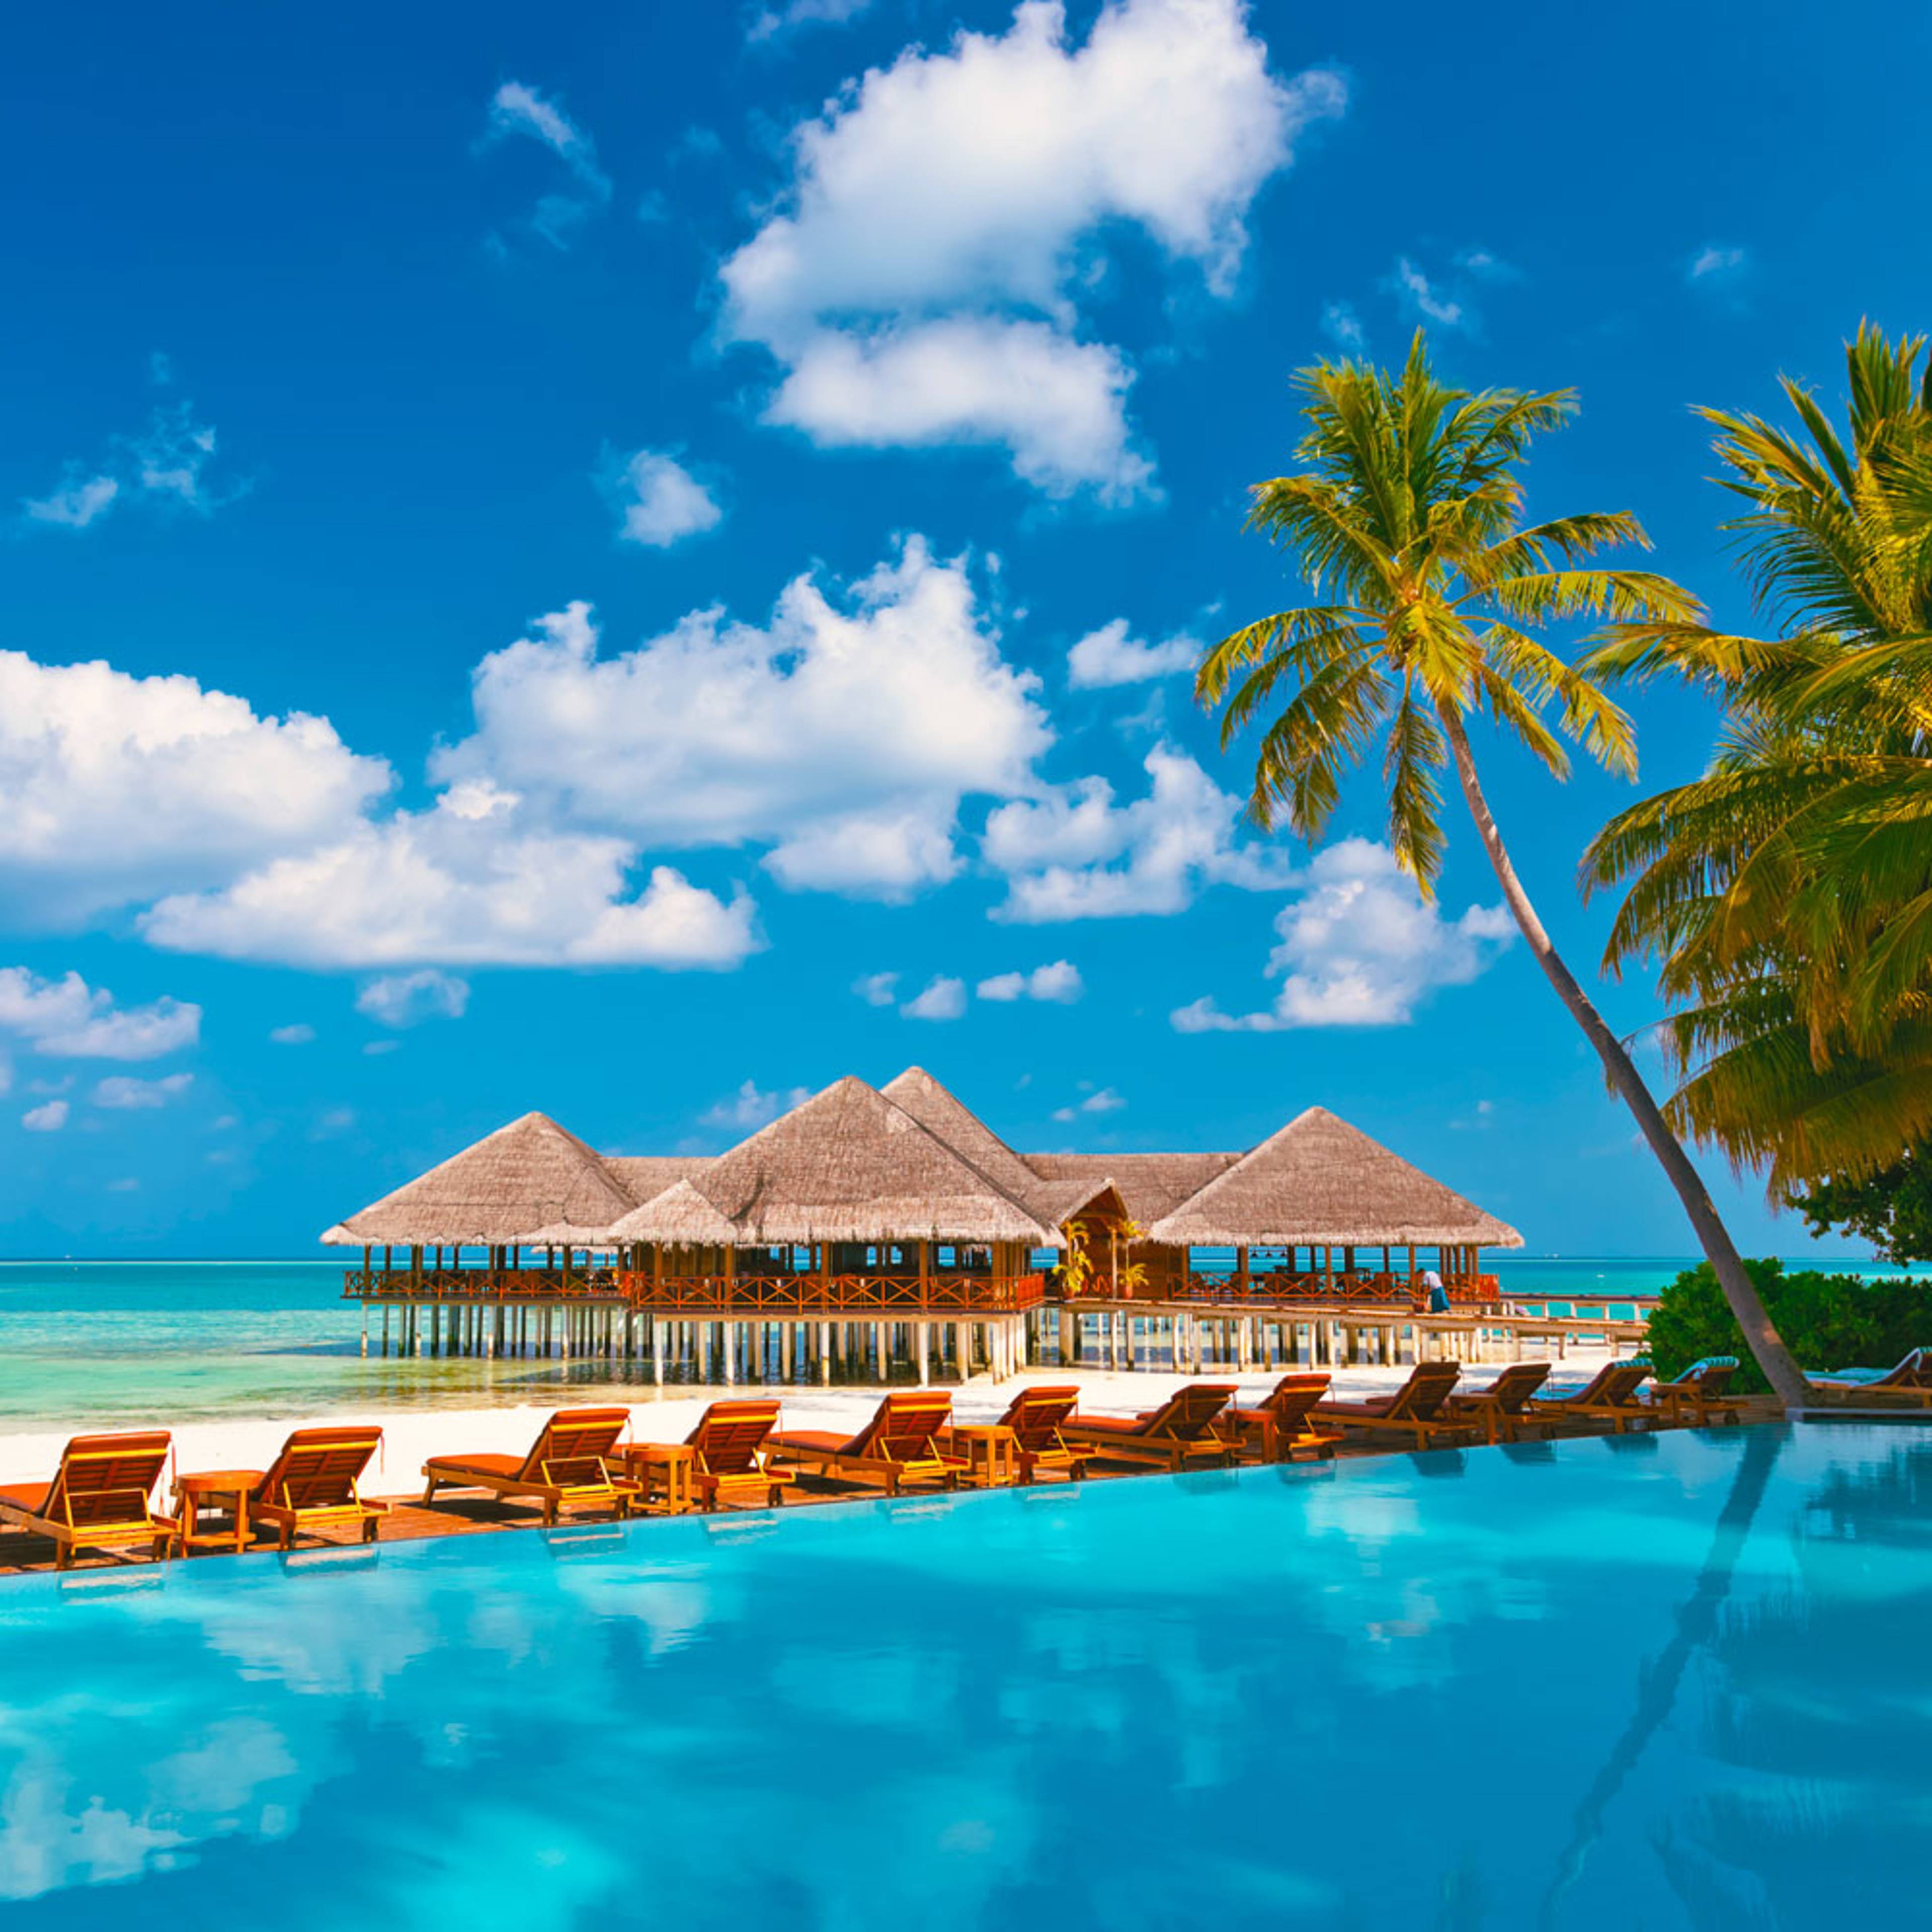 Design your perfect summer holiday in The Maldives with a local expert